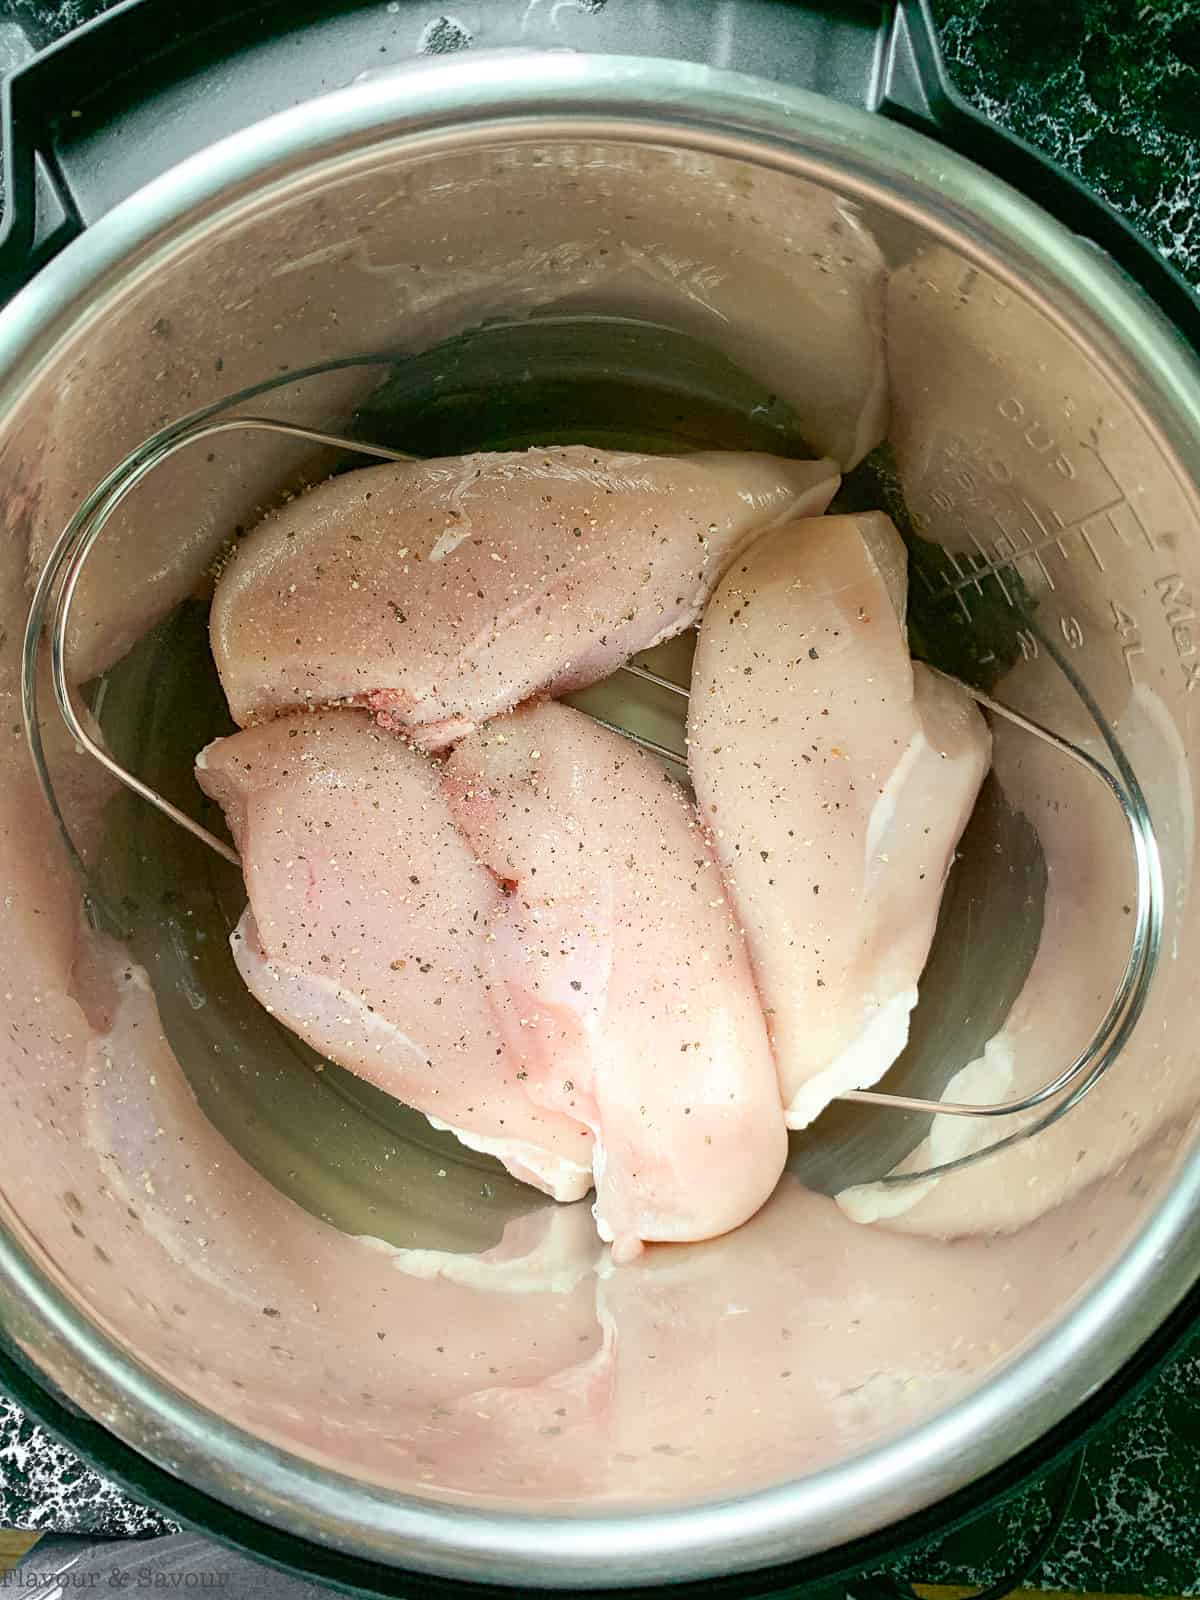 Raw chicken breasts in an Instant Pot.